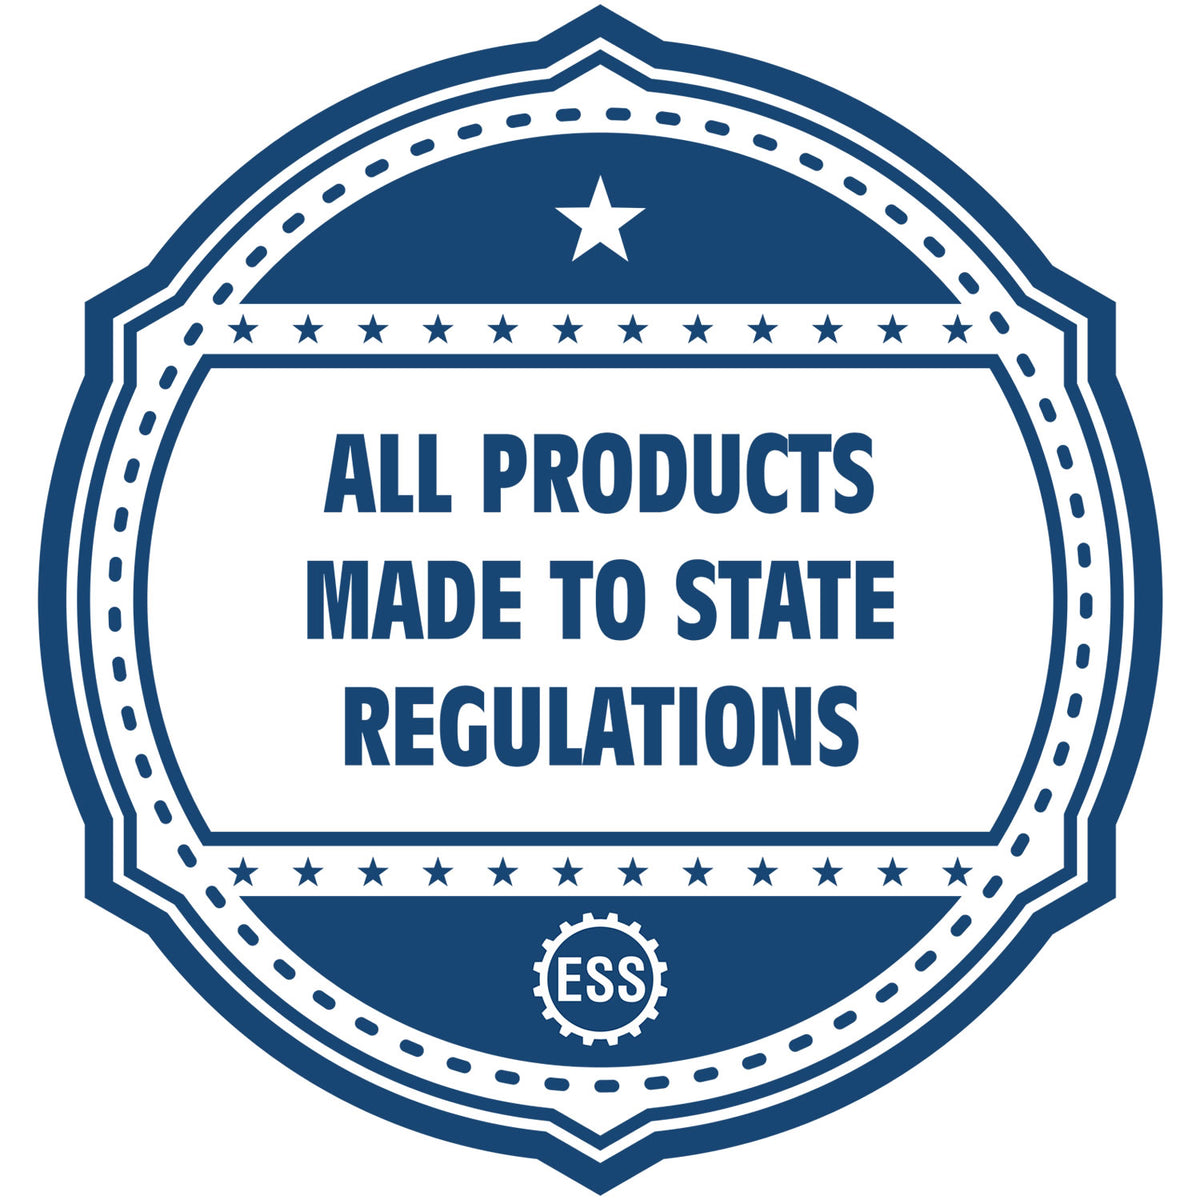 An icon or badge element for the Heavy Duty Cast Iron Florida Engineer Seal Embosser showing that this product is made in compliance with state regulations.